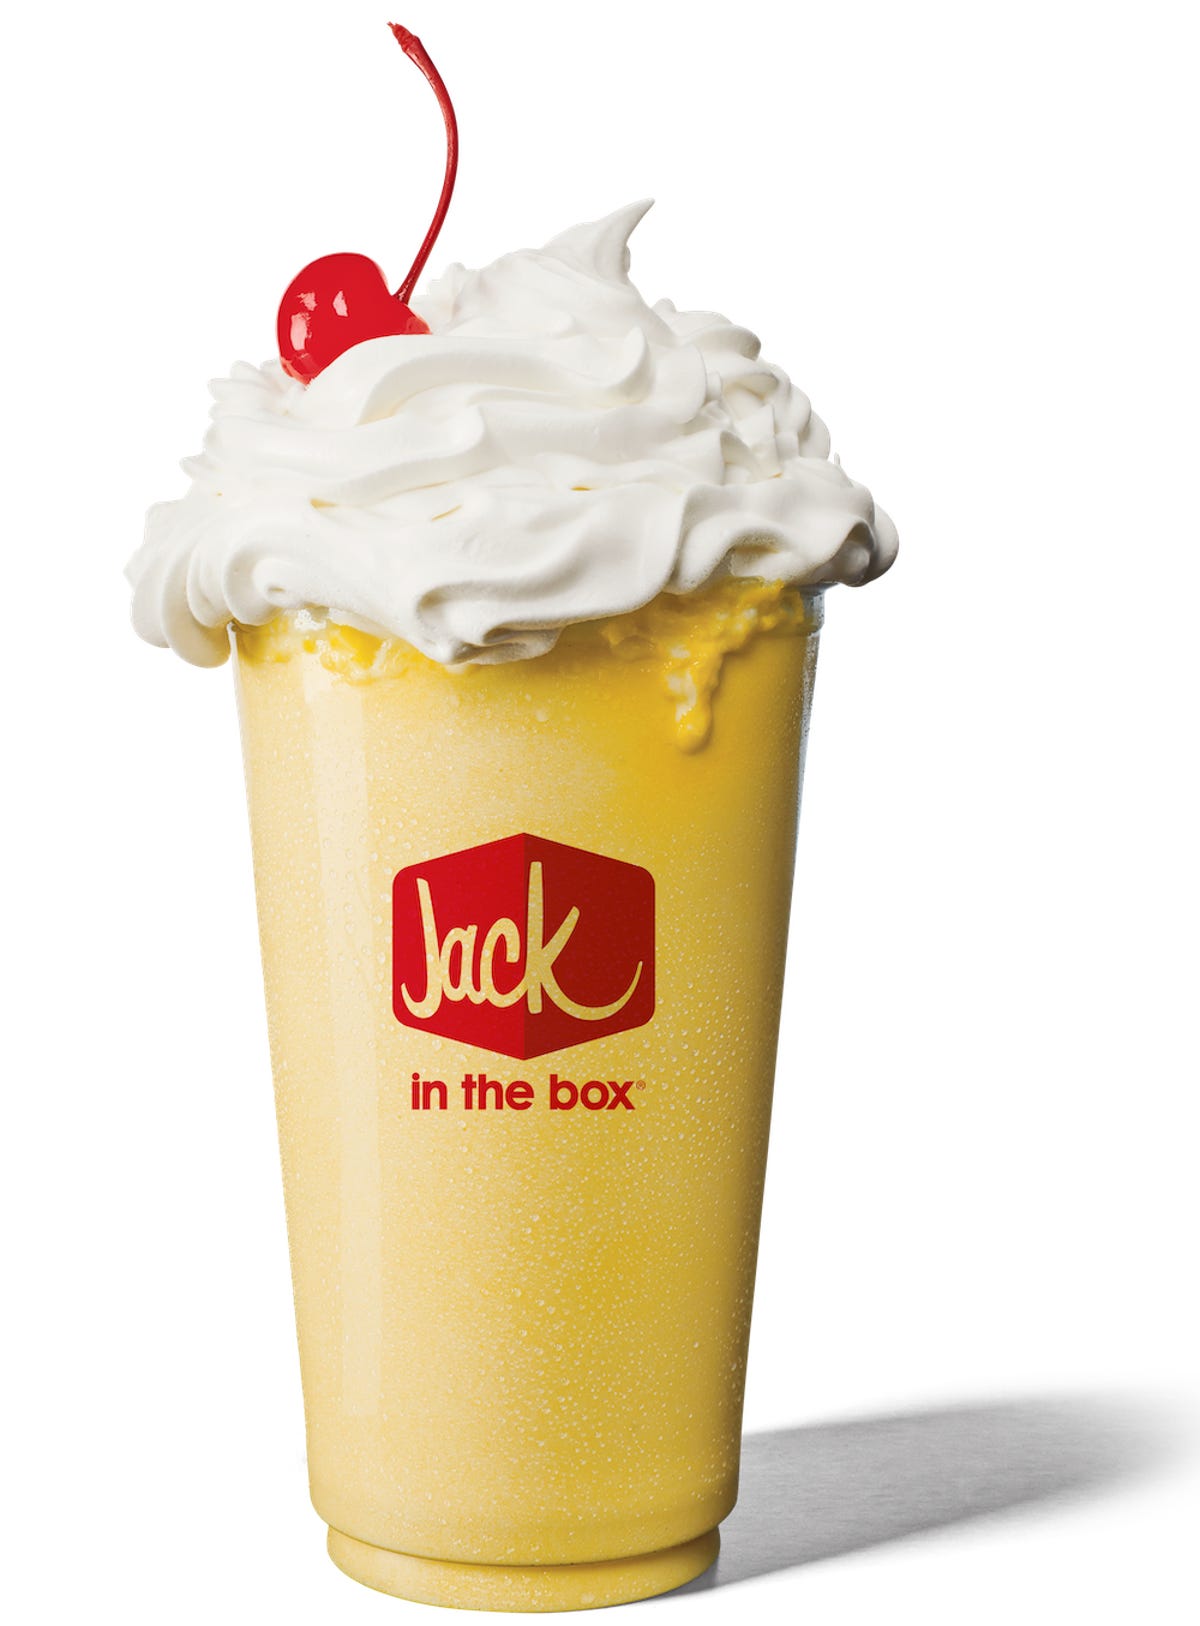 Jack in the Box Pineapple Express shake